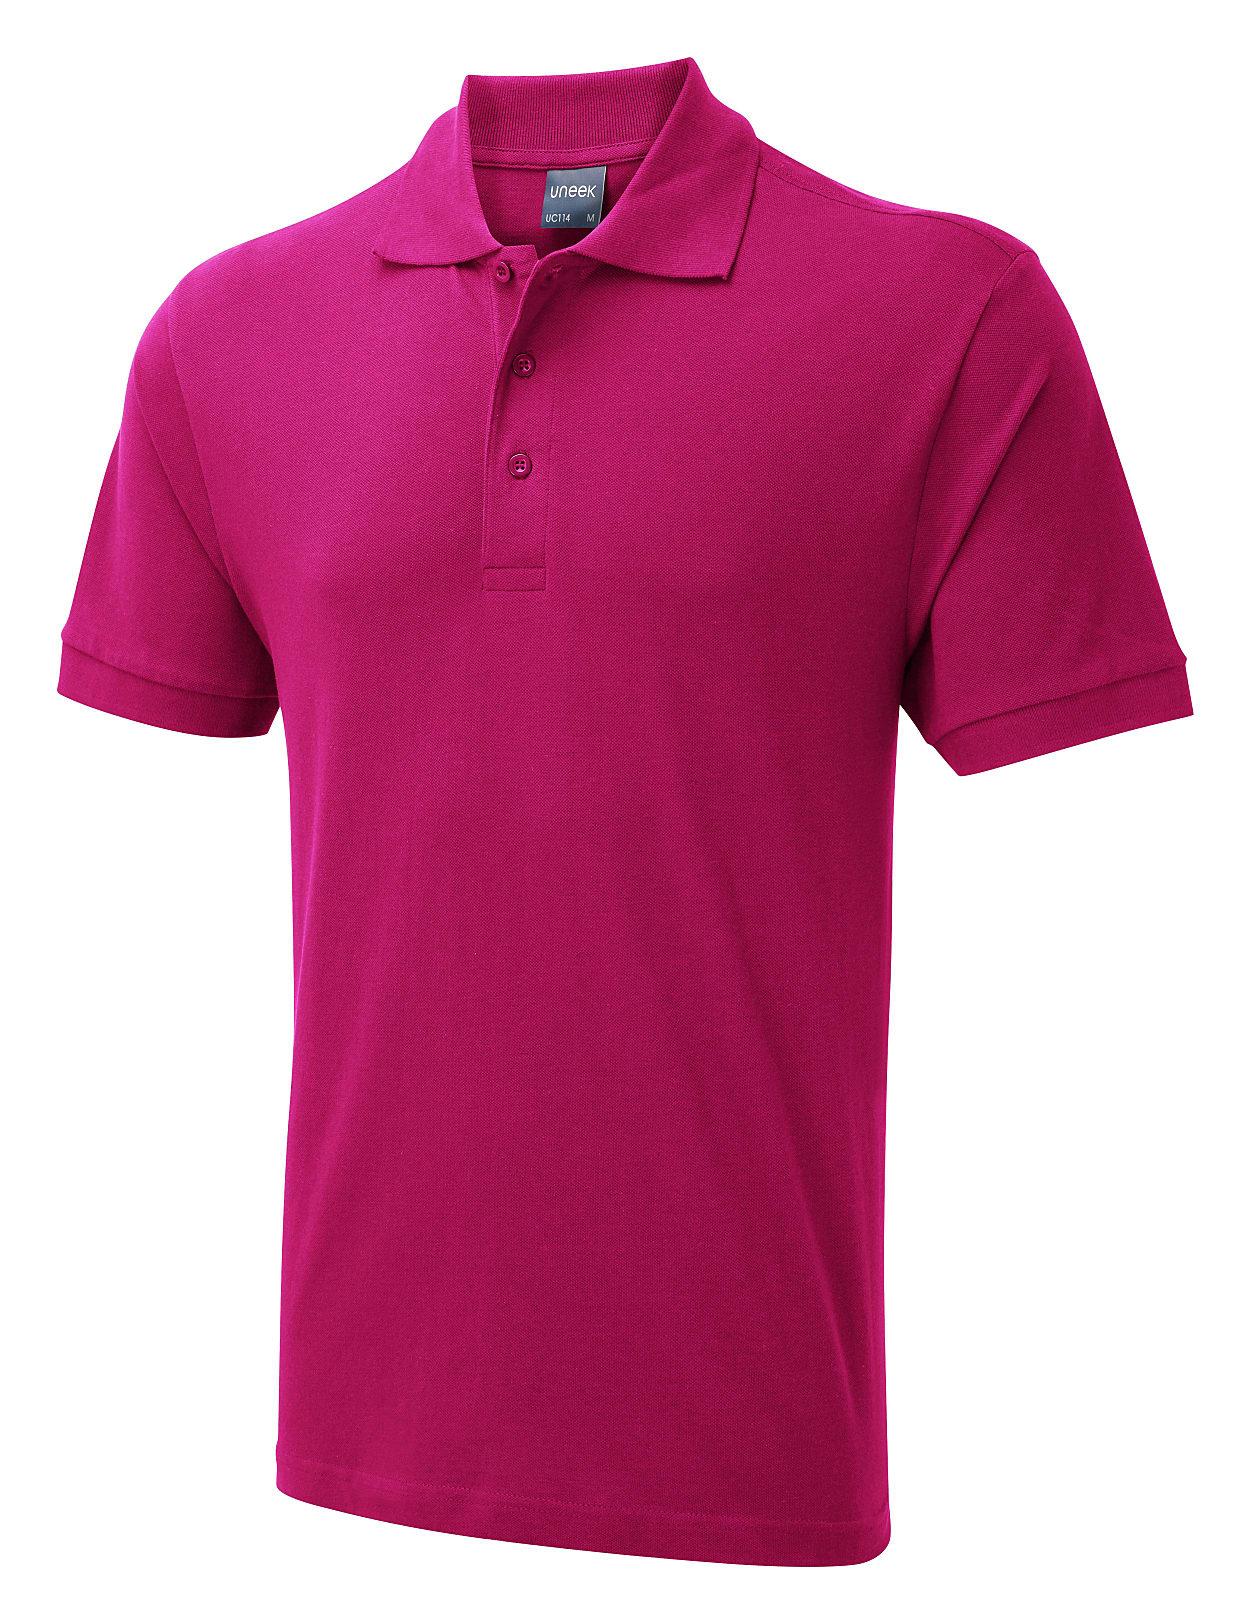 Uneek 180GSM Mens Polo Shirt in Hot Pink (Product Code: UC114)